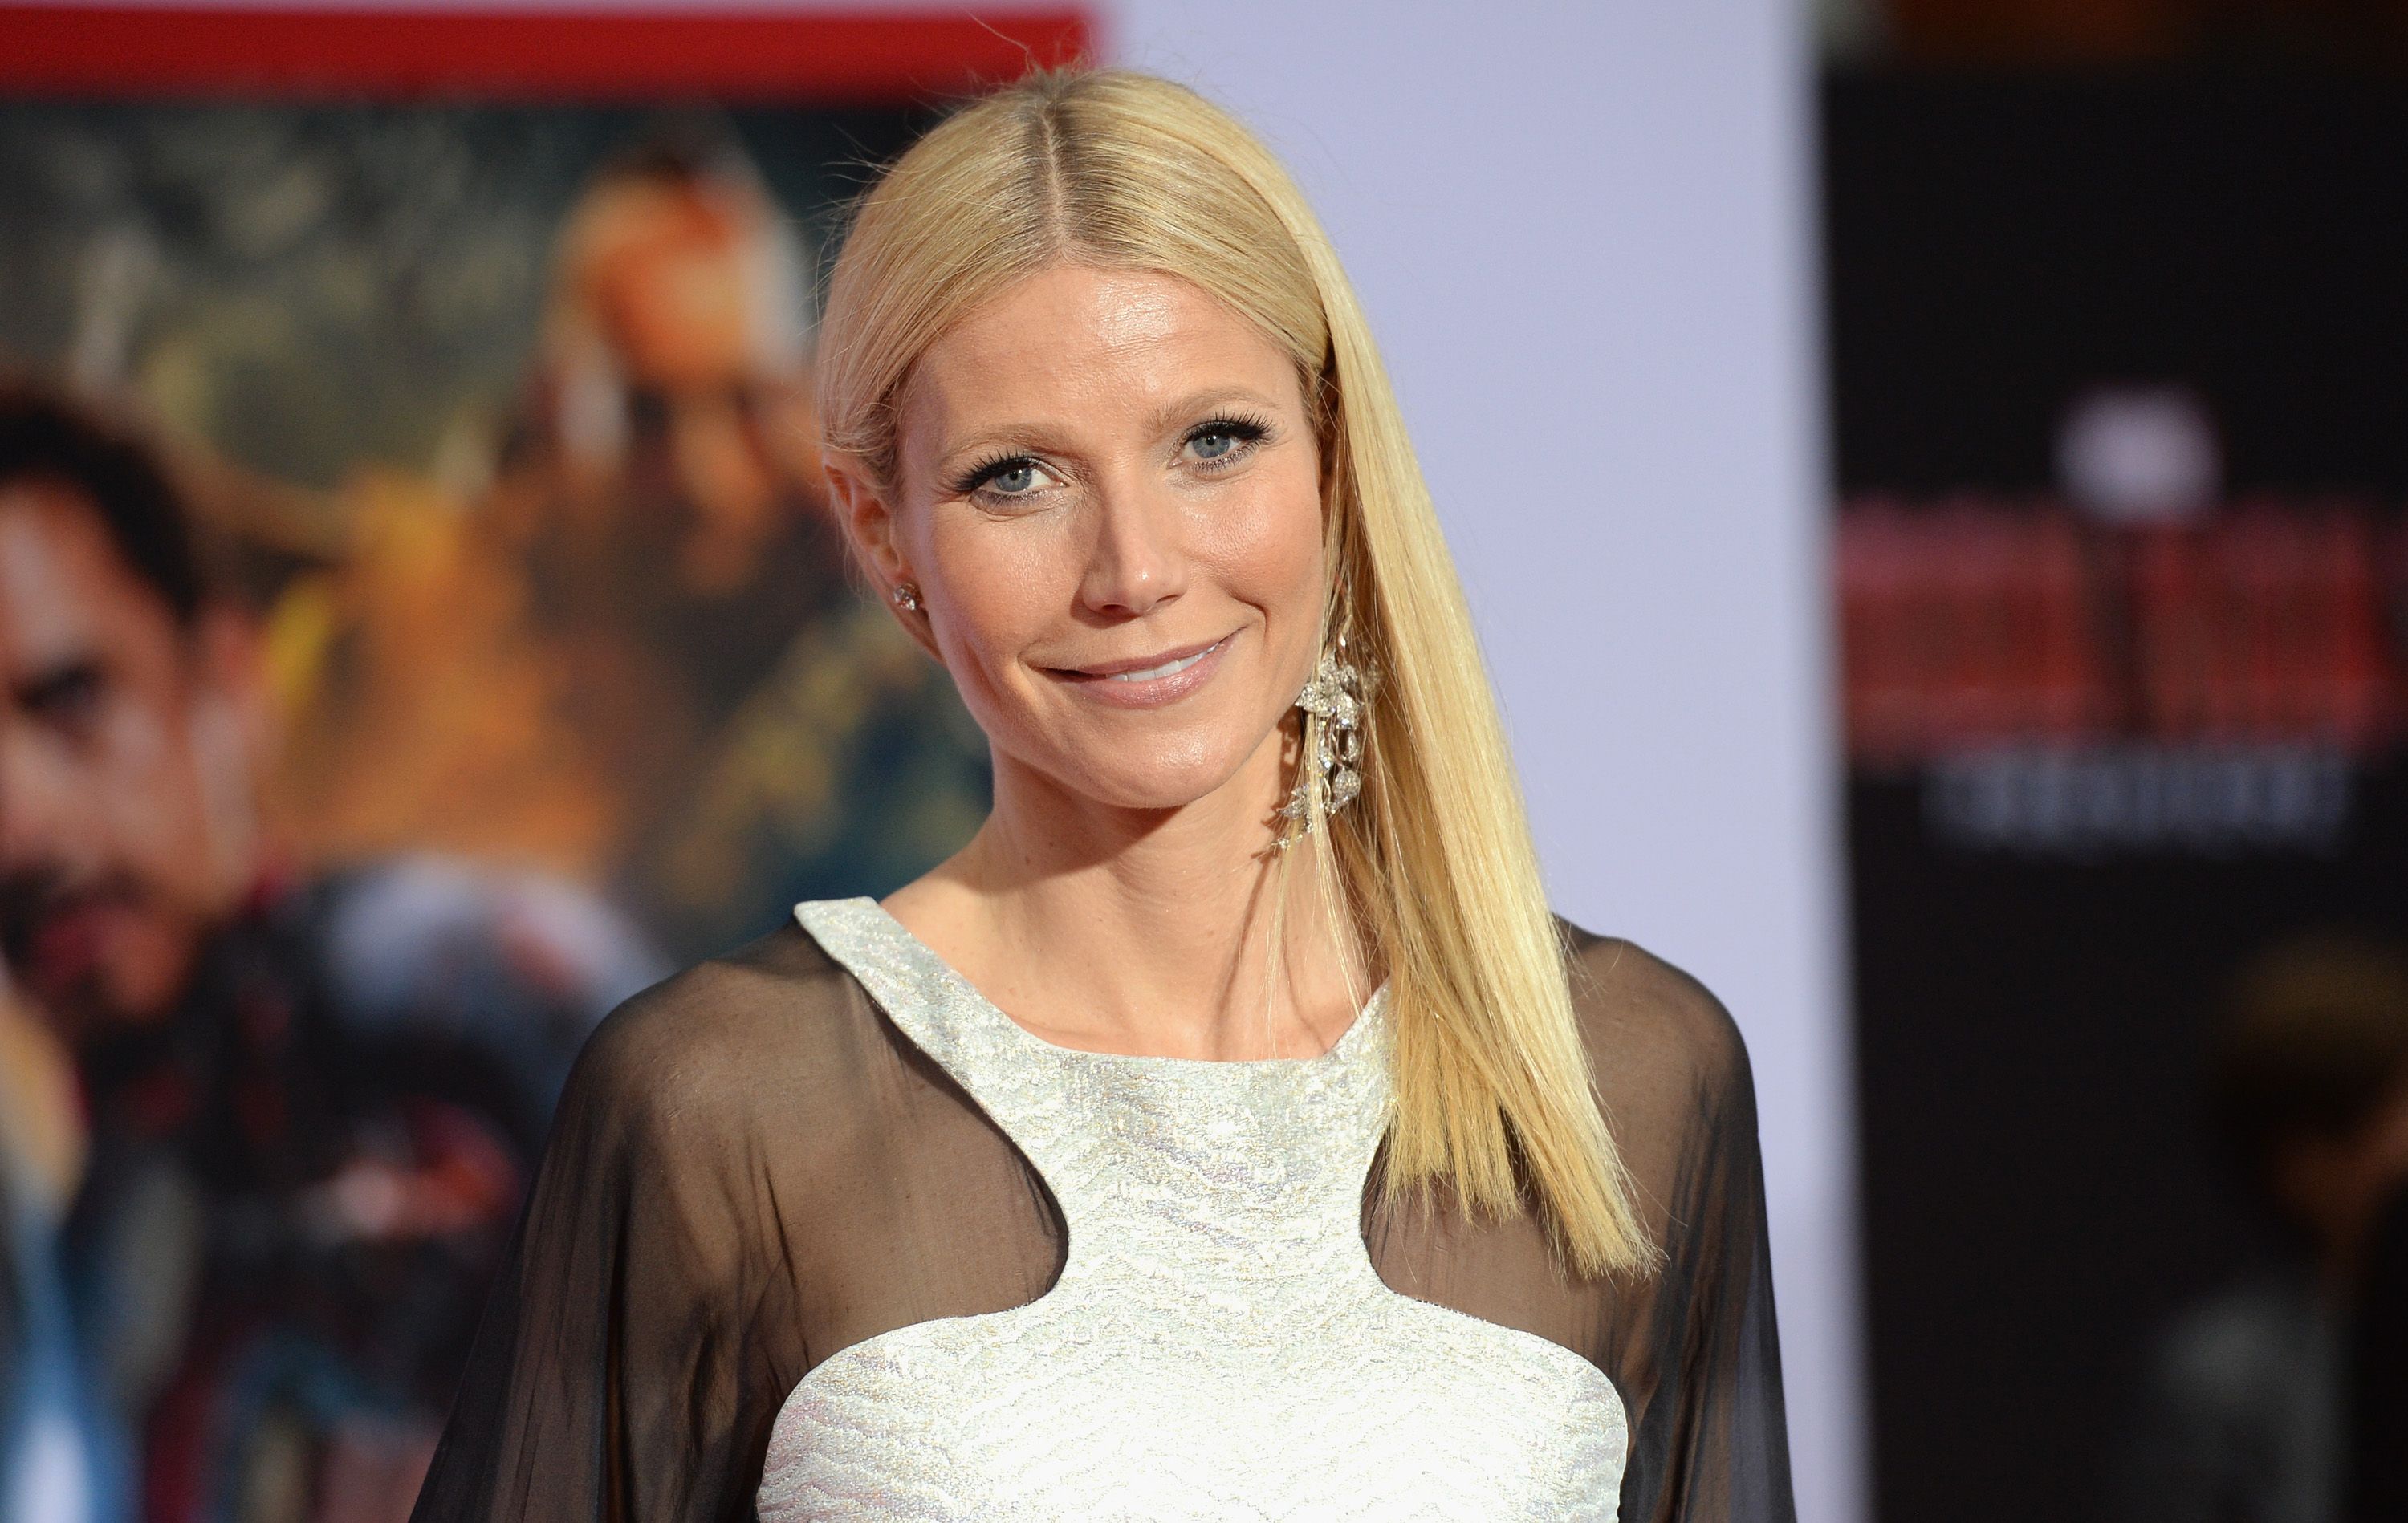 Gwyneth Paltrow at the premiere of "Iron Man 3" at the El Capitan Theatre on April 24, 2013, in Hollywood, California | Photo: Jason Merritt/Getty Images